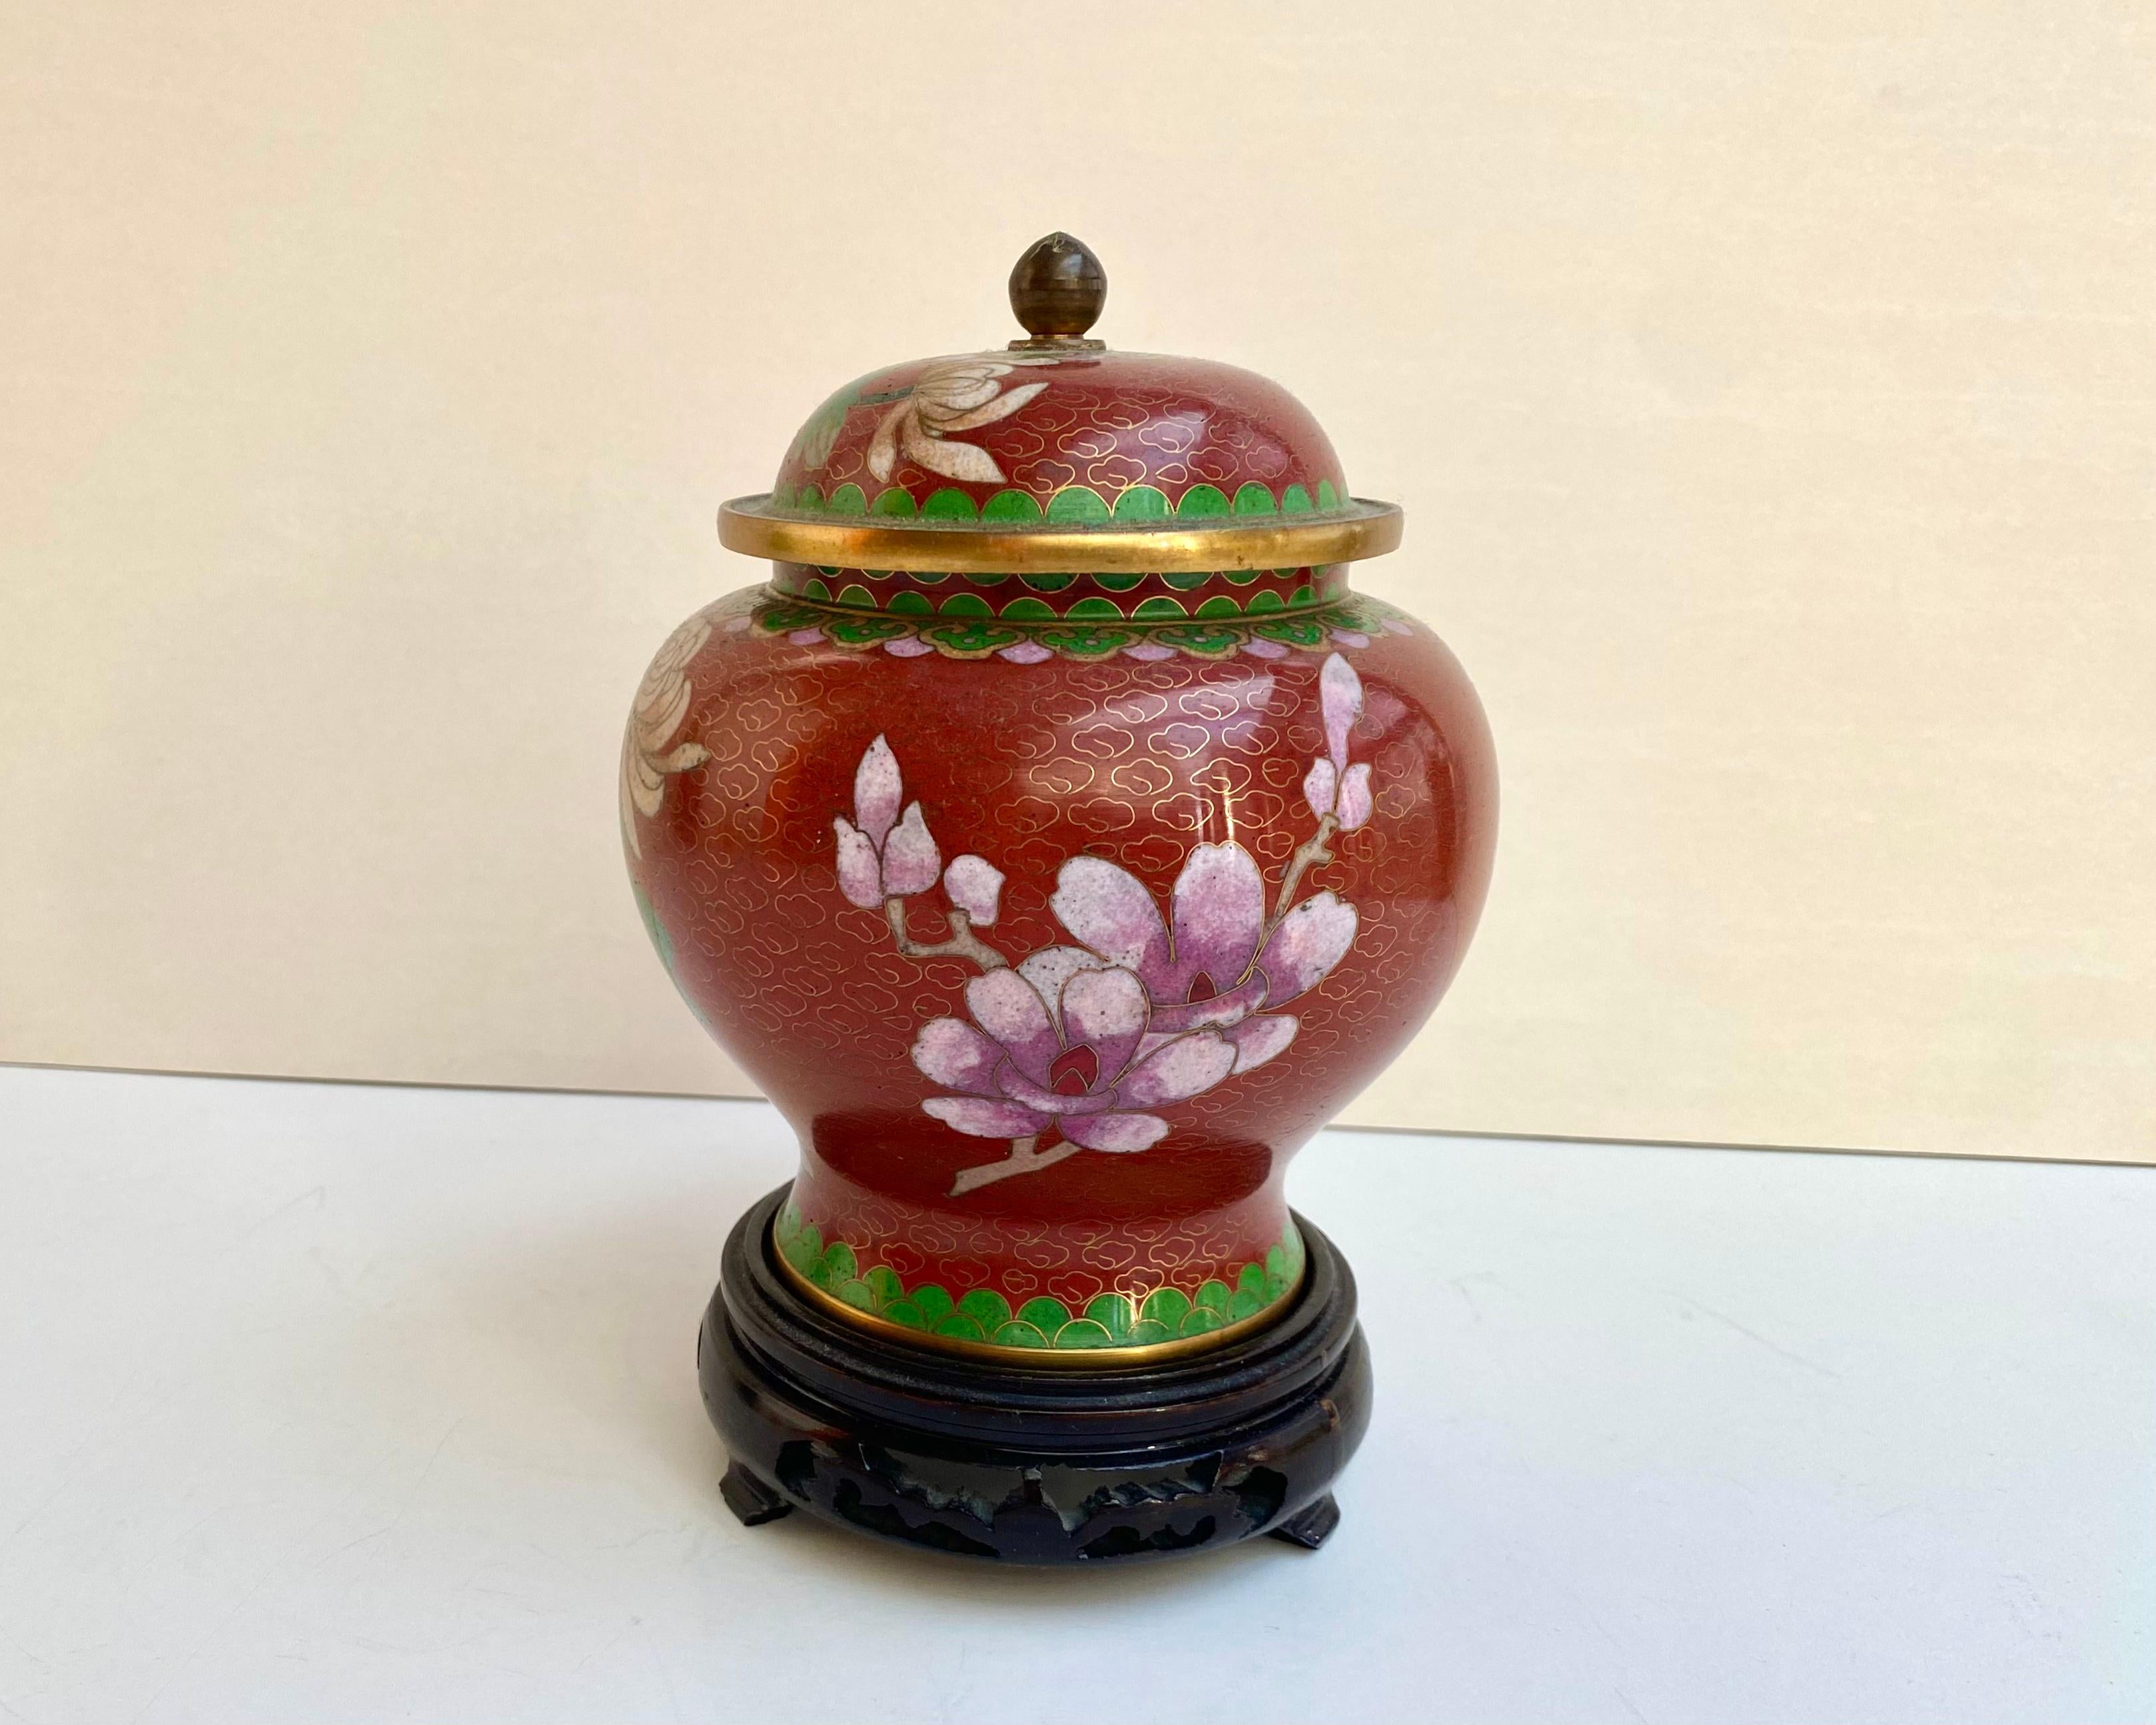 Ornate cloisonné lidded vase on wooden stand with a red background! China, 1970s.

This charming jar has a floral design with one bird.

Vintage ginger jar In nice shape as shown in the photos.

About the history of the technique of cloisonné